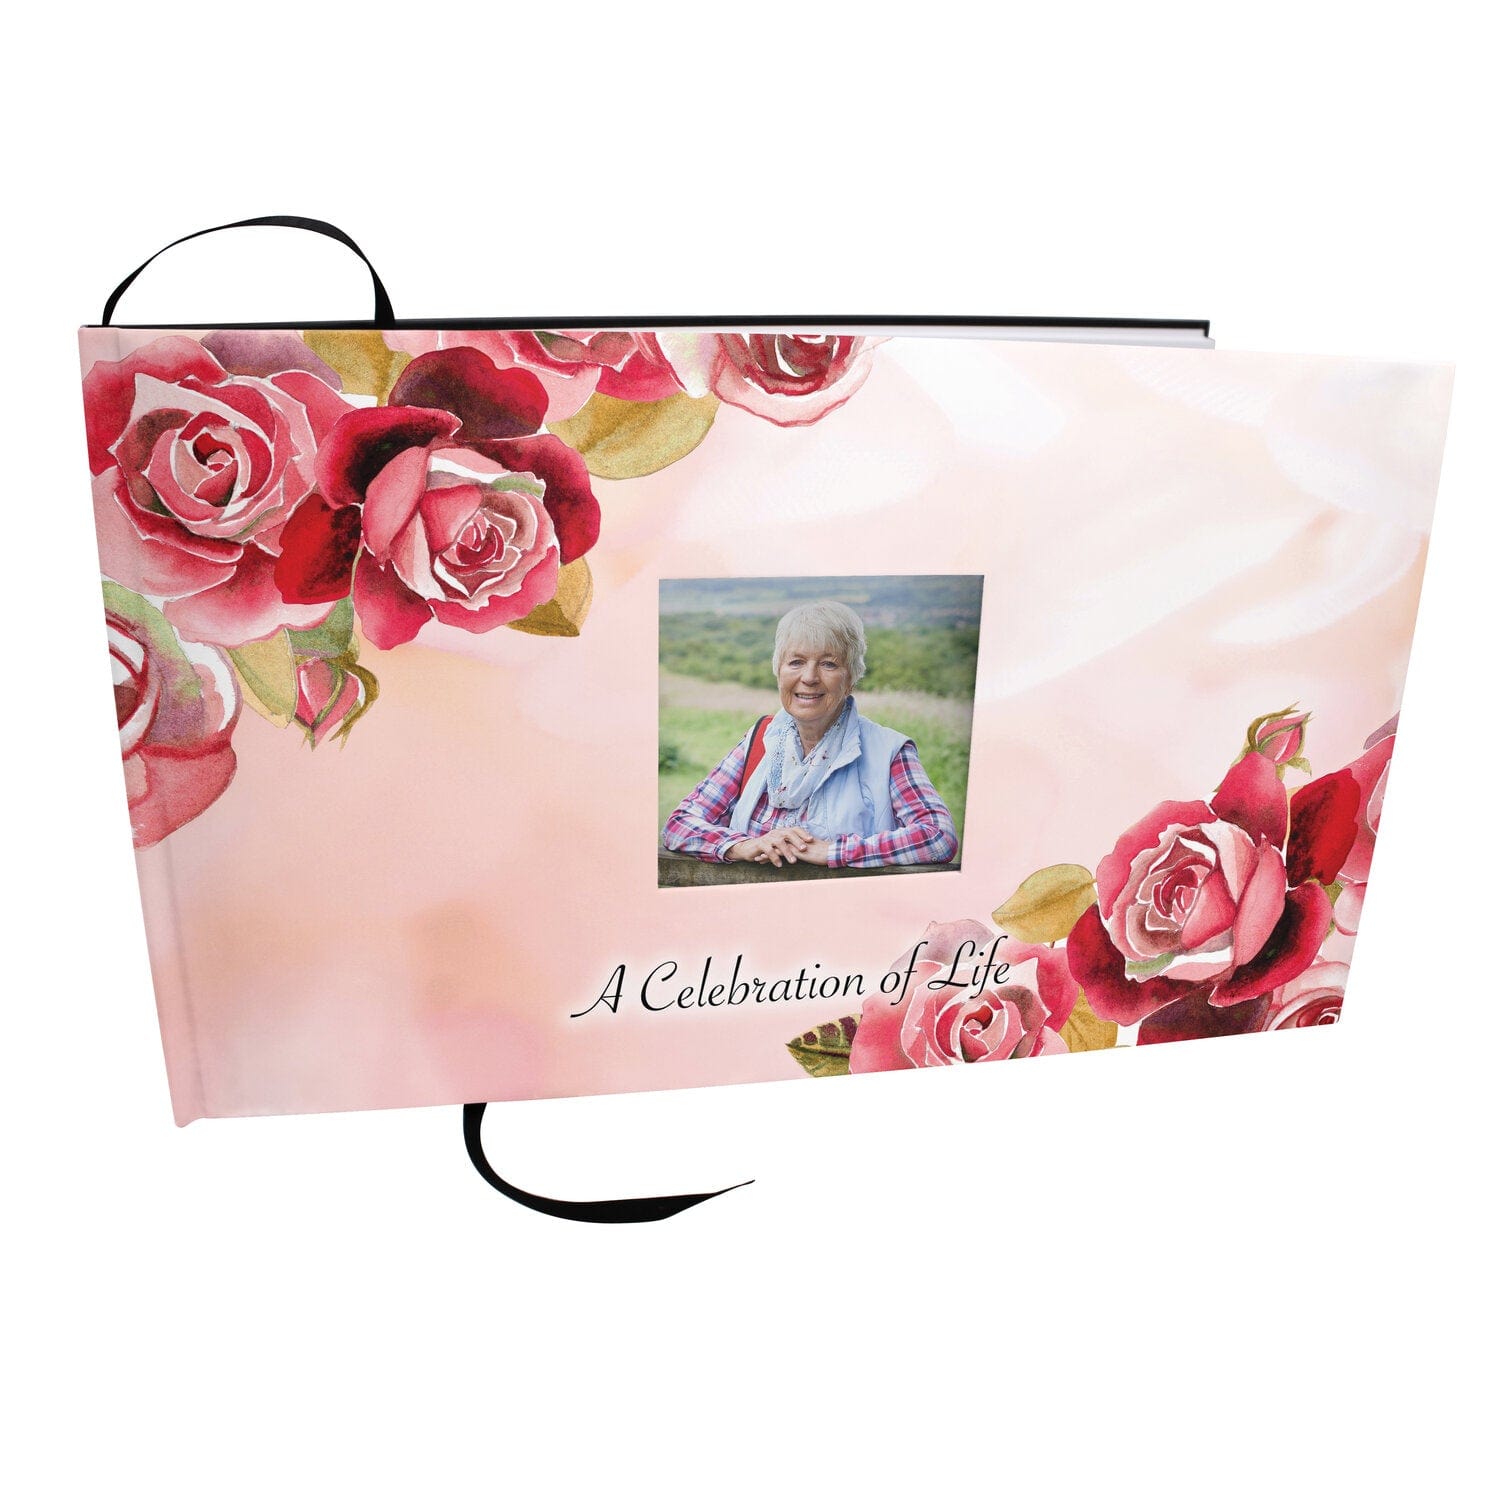 Commemorative Cremation Urns Home & Garden Holy Roses Matching Themed 'Celebration of Life' Guest Book for Funeral or Memorial Service